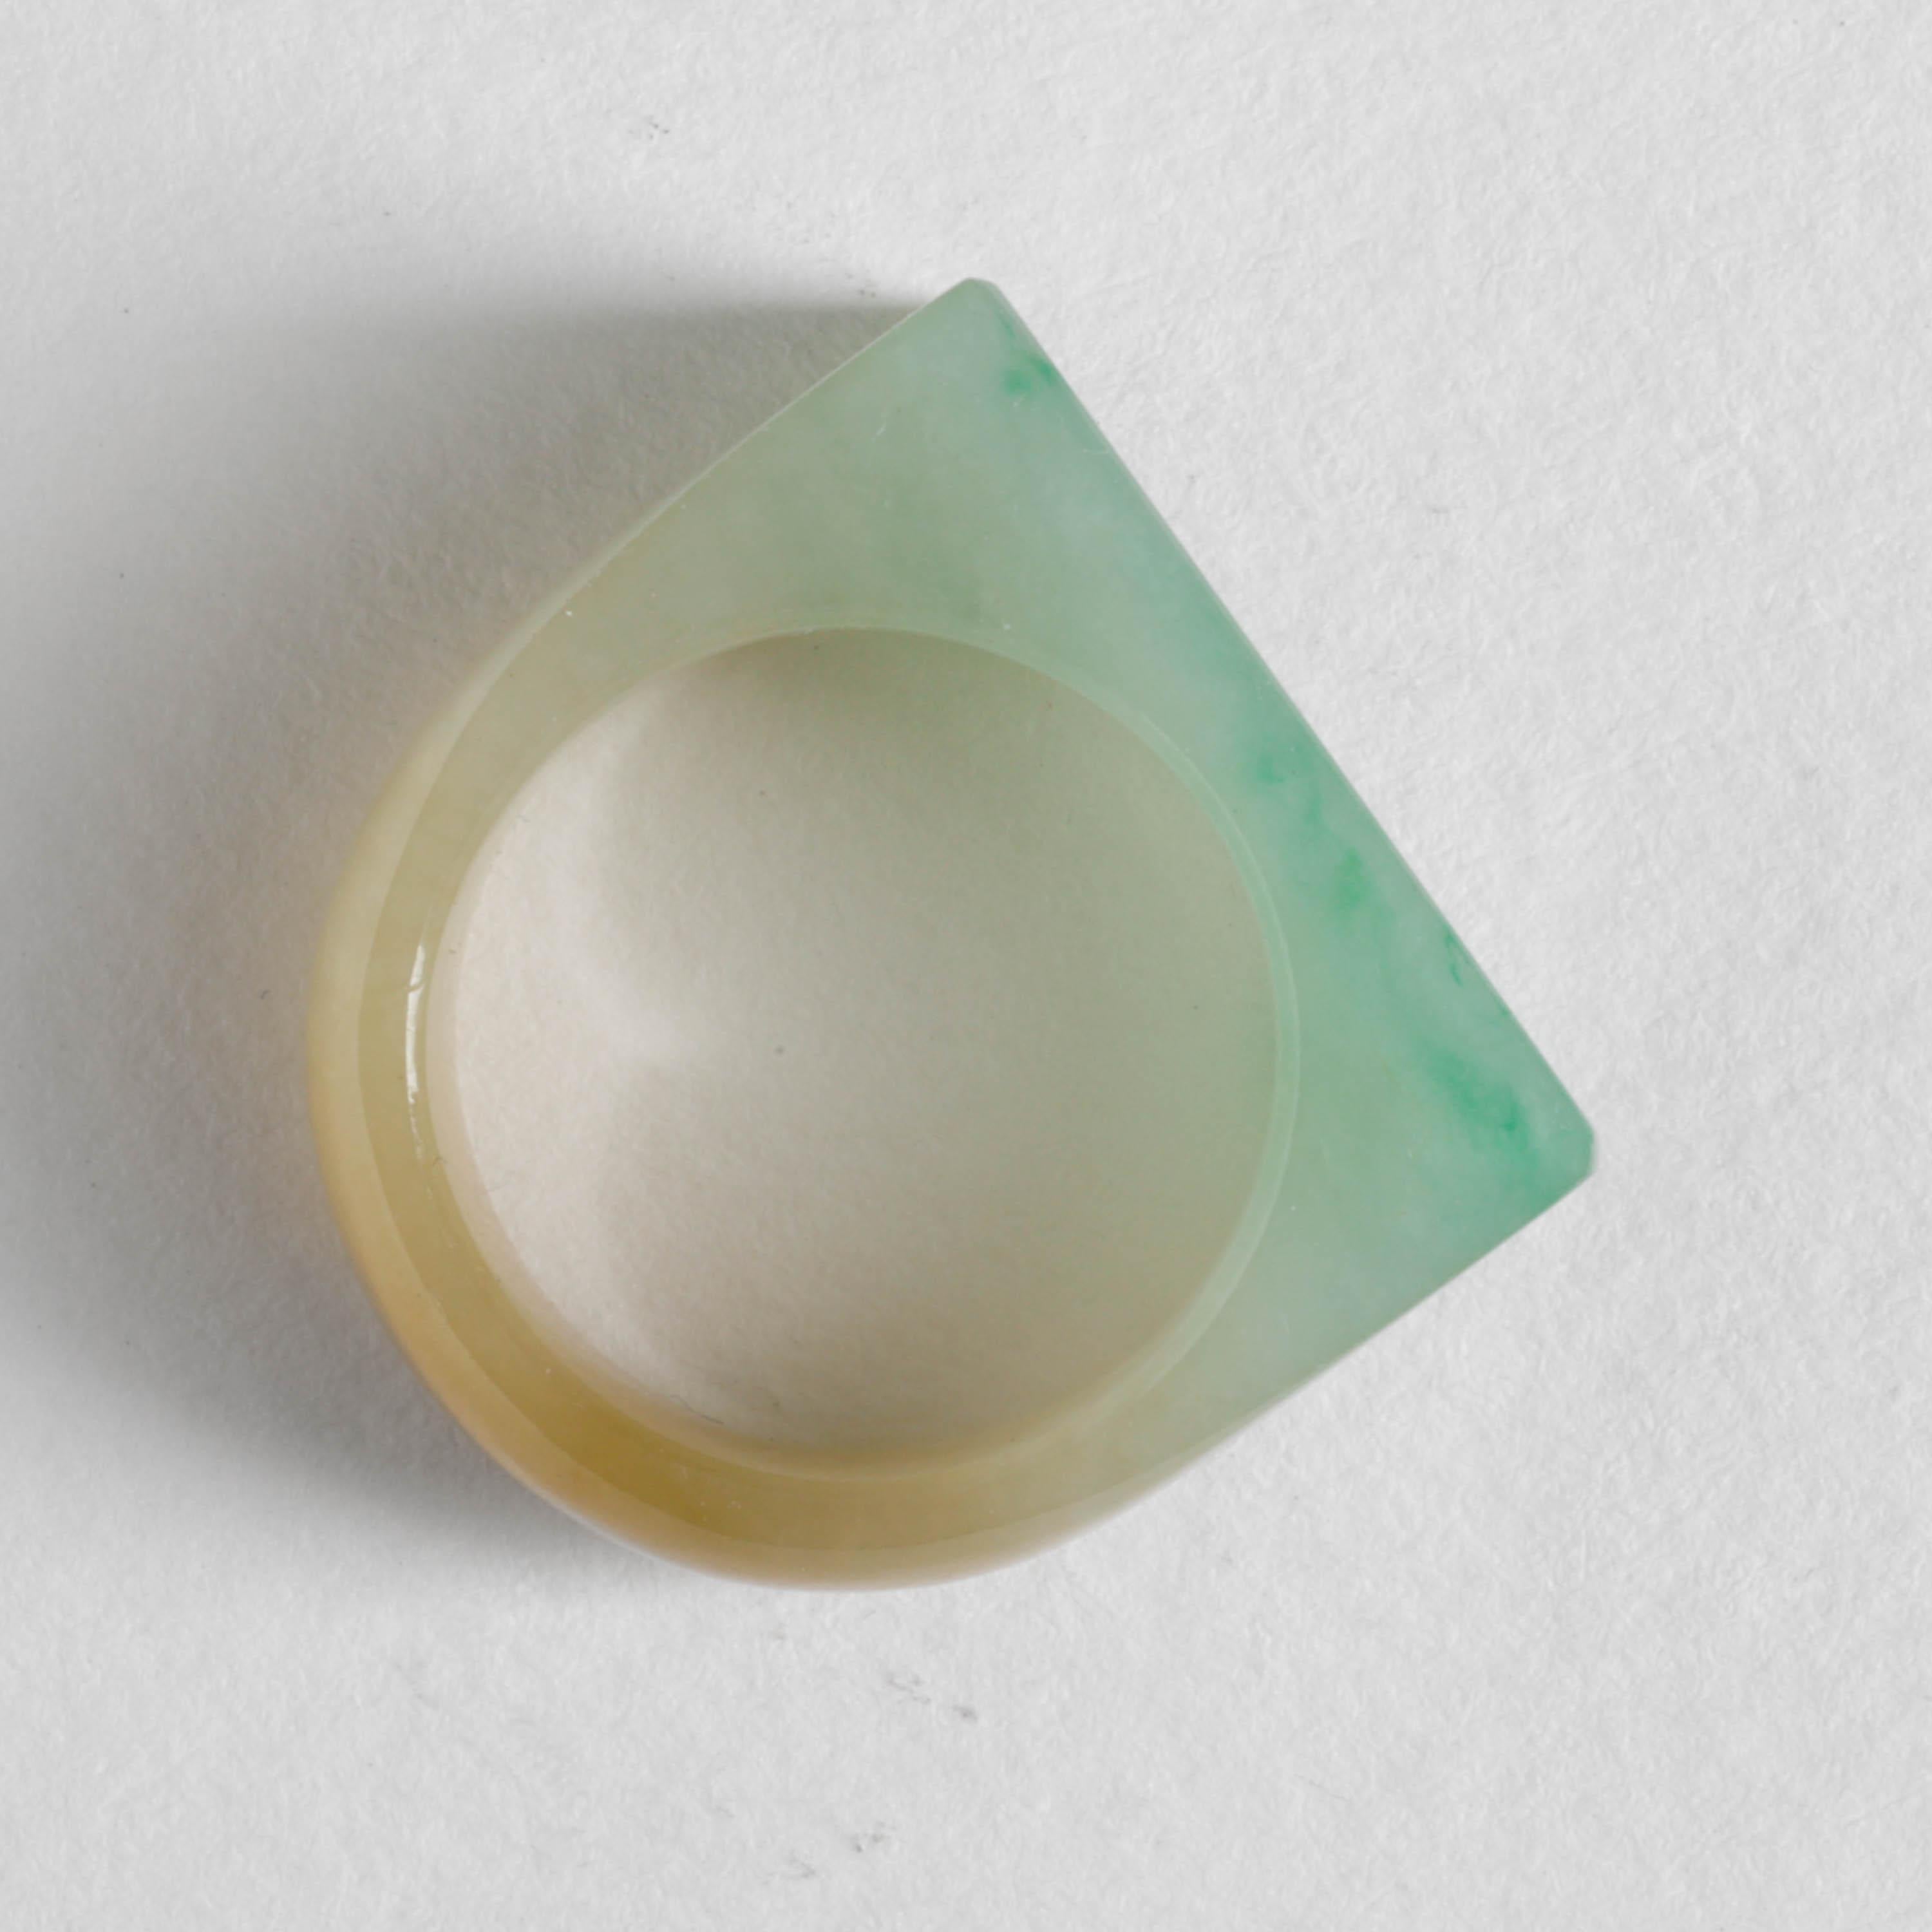 This is a highly translucent hand-carved new jadeite jade ring. It's a masterpiece of subtle and lapidary skill. The green face has been carved with a chamfered edge that gives this centuries-old style of ring a decidedly modern aesthetic. 

The